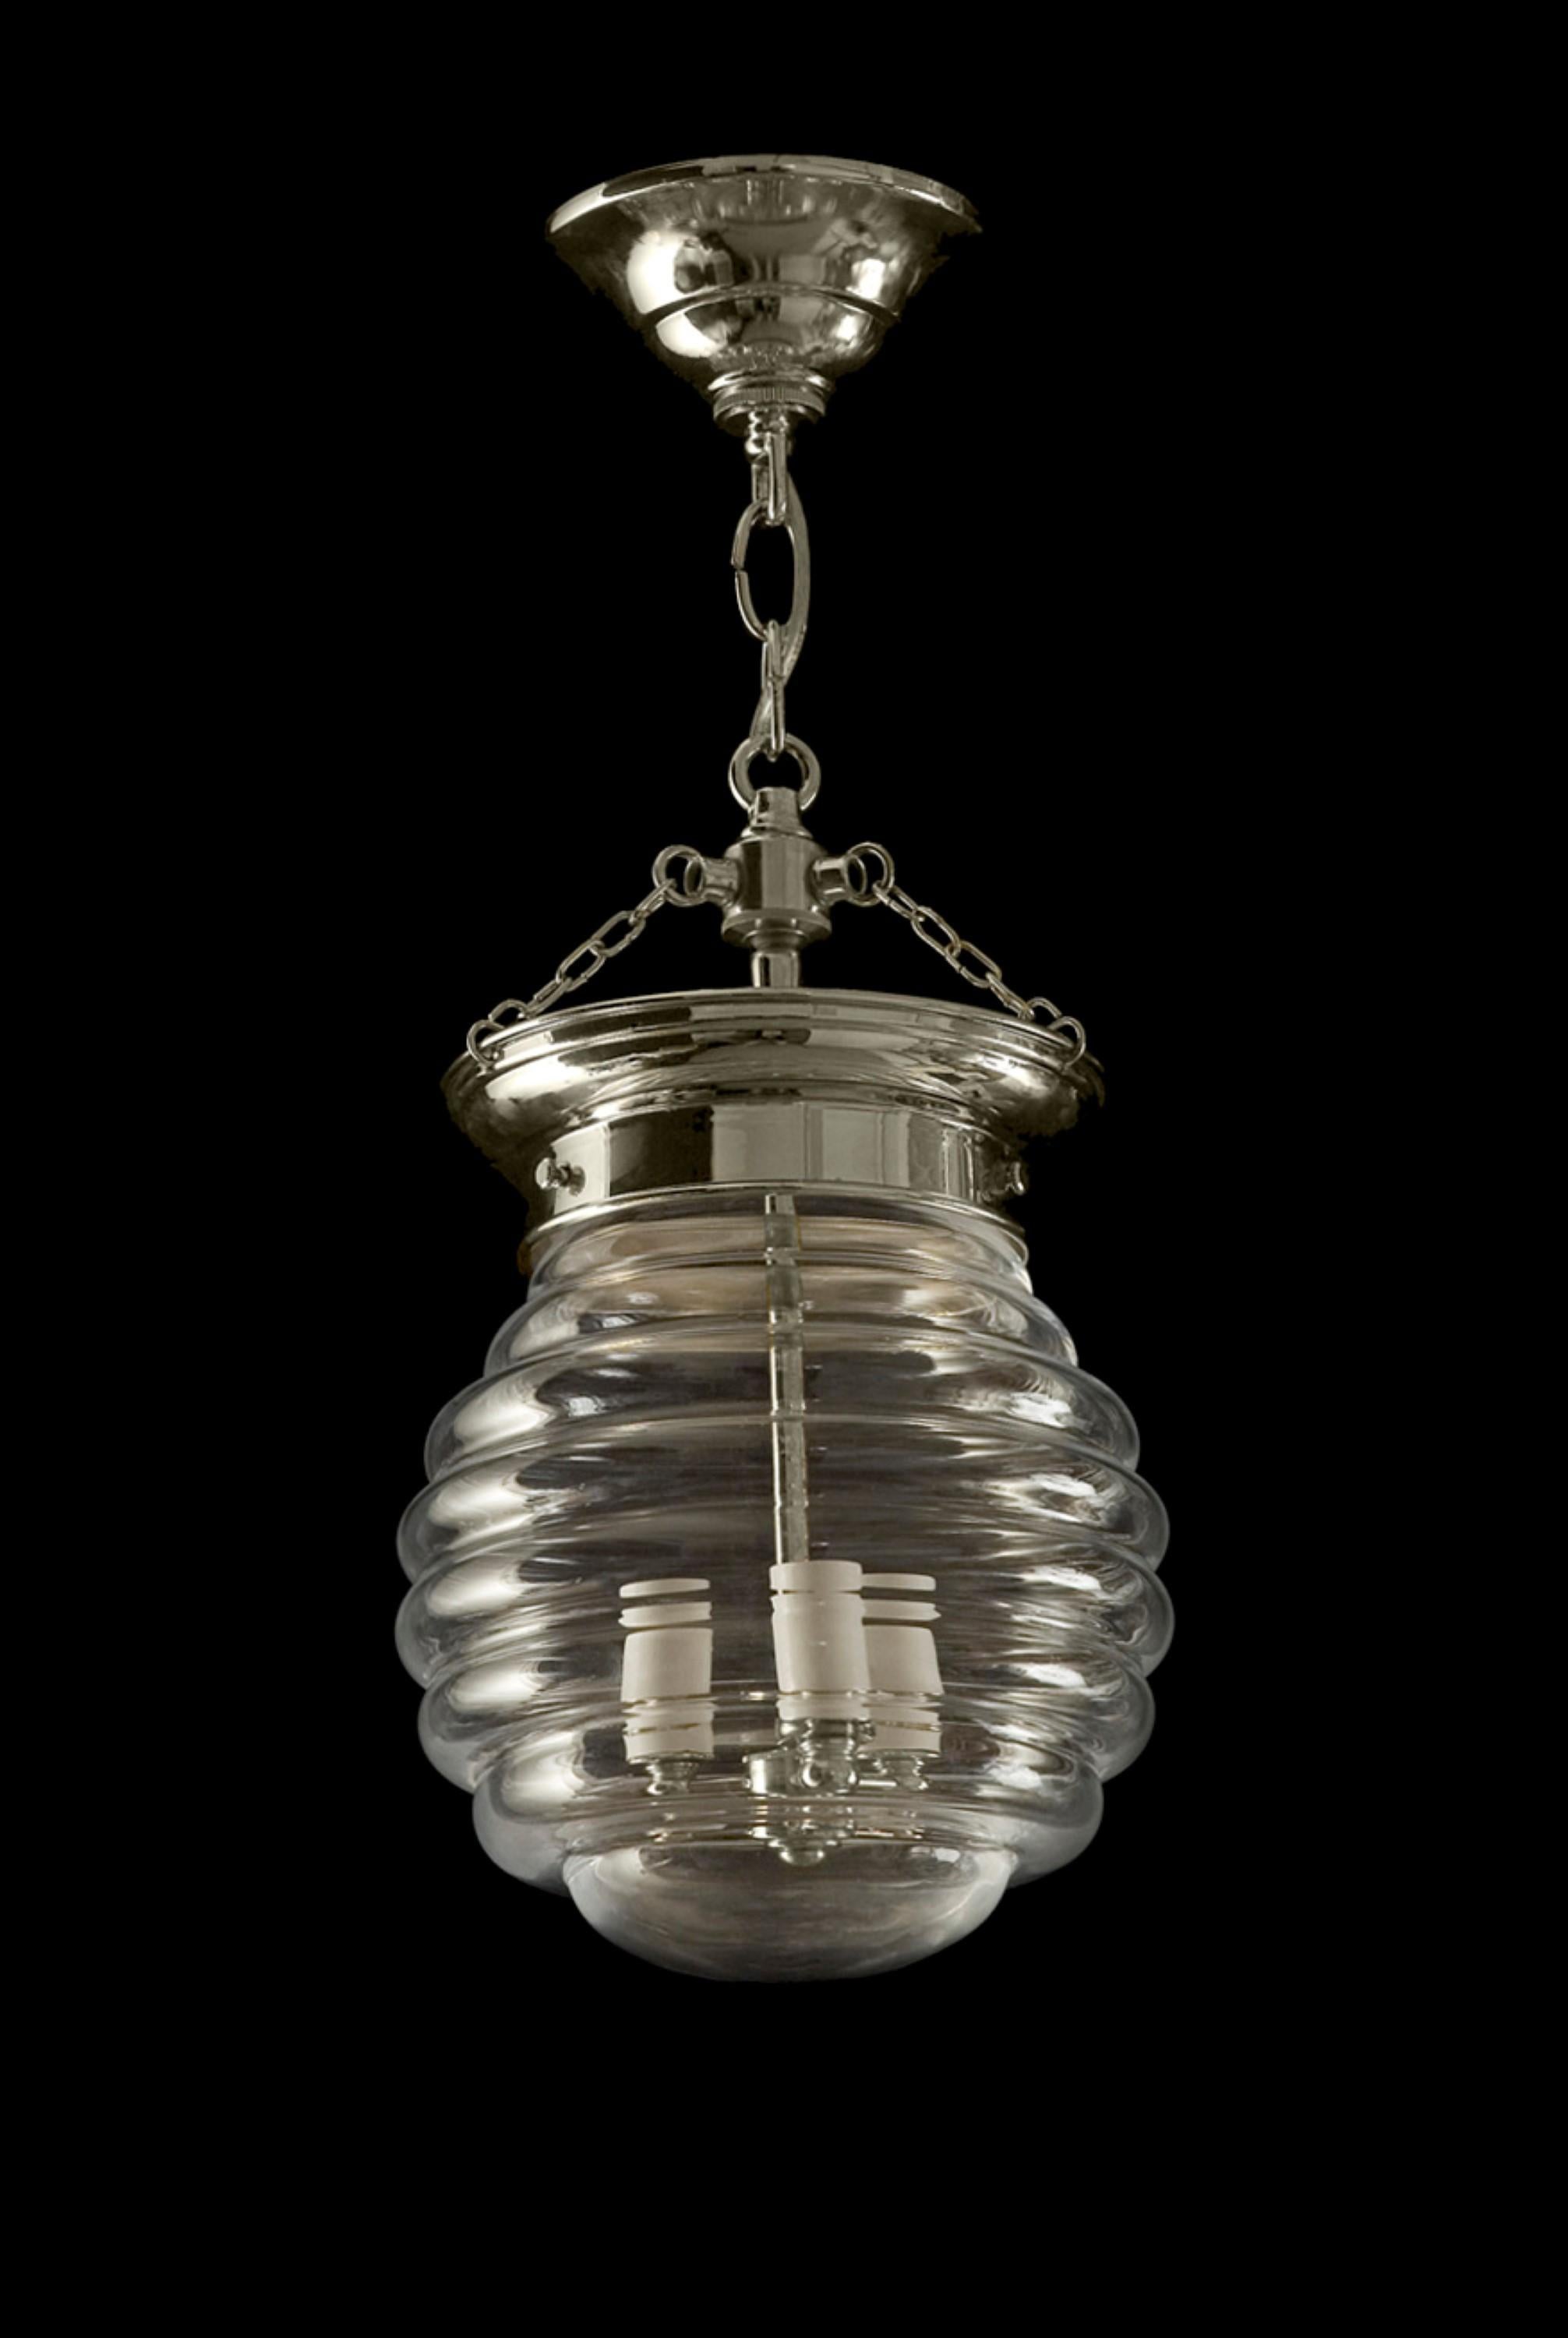 Hand blown beehive style glass shade adorned this nick plated brass pendant light. Takes three standard candelabra light bulbs. Cleaned and restored. Please note, this item is located in one of our NYC locations.